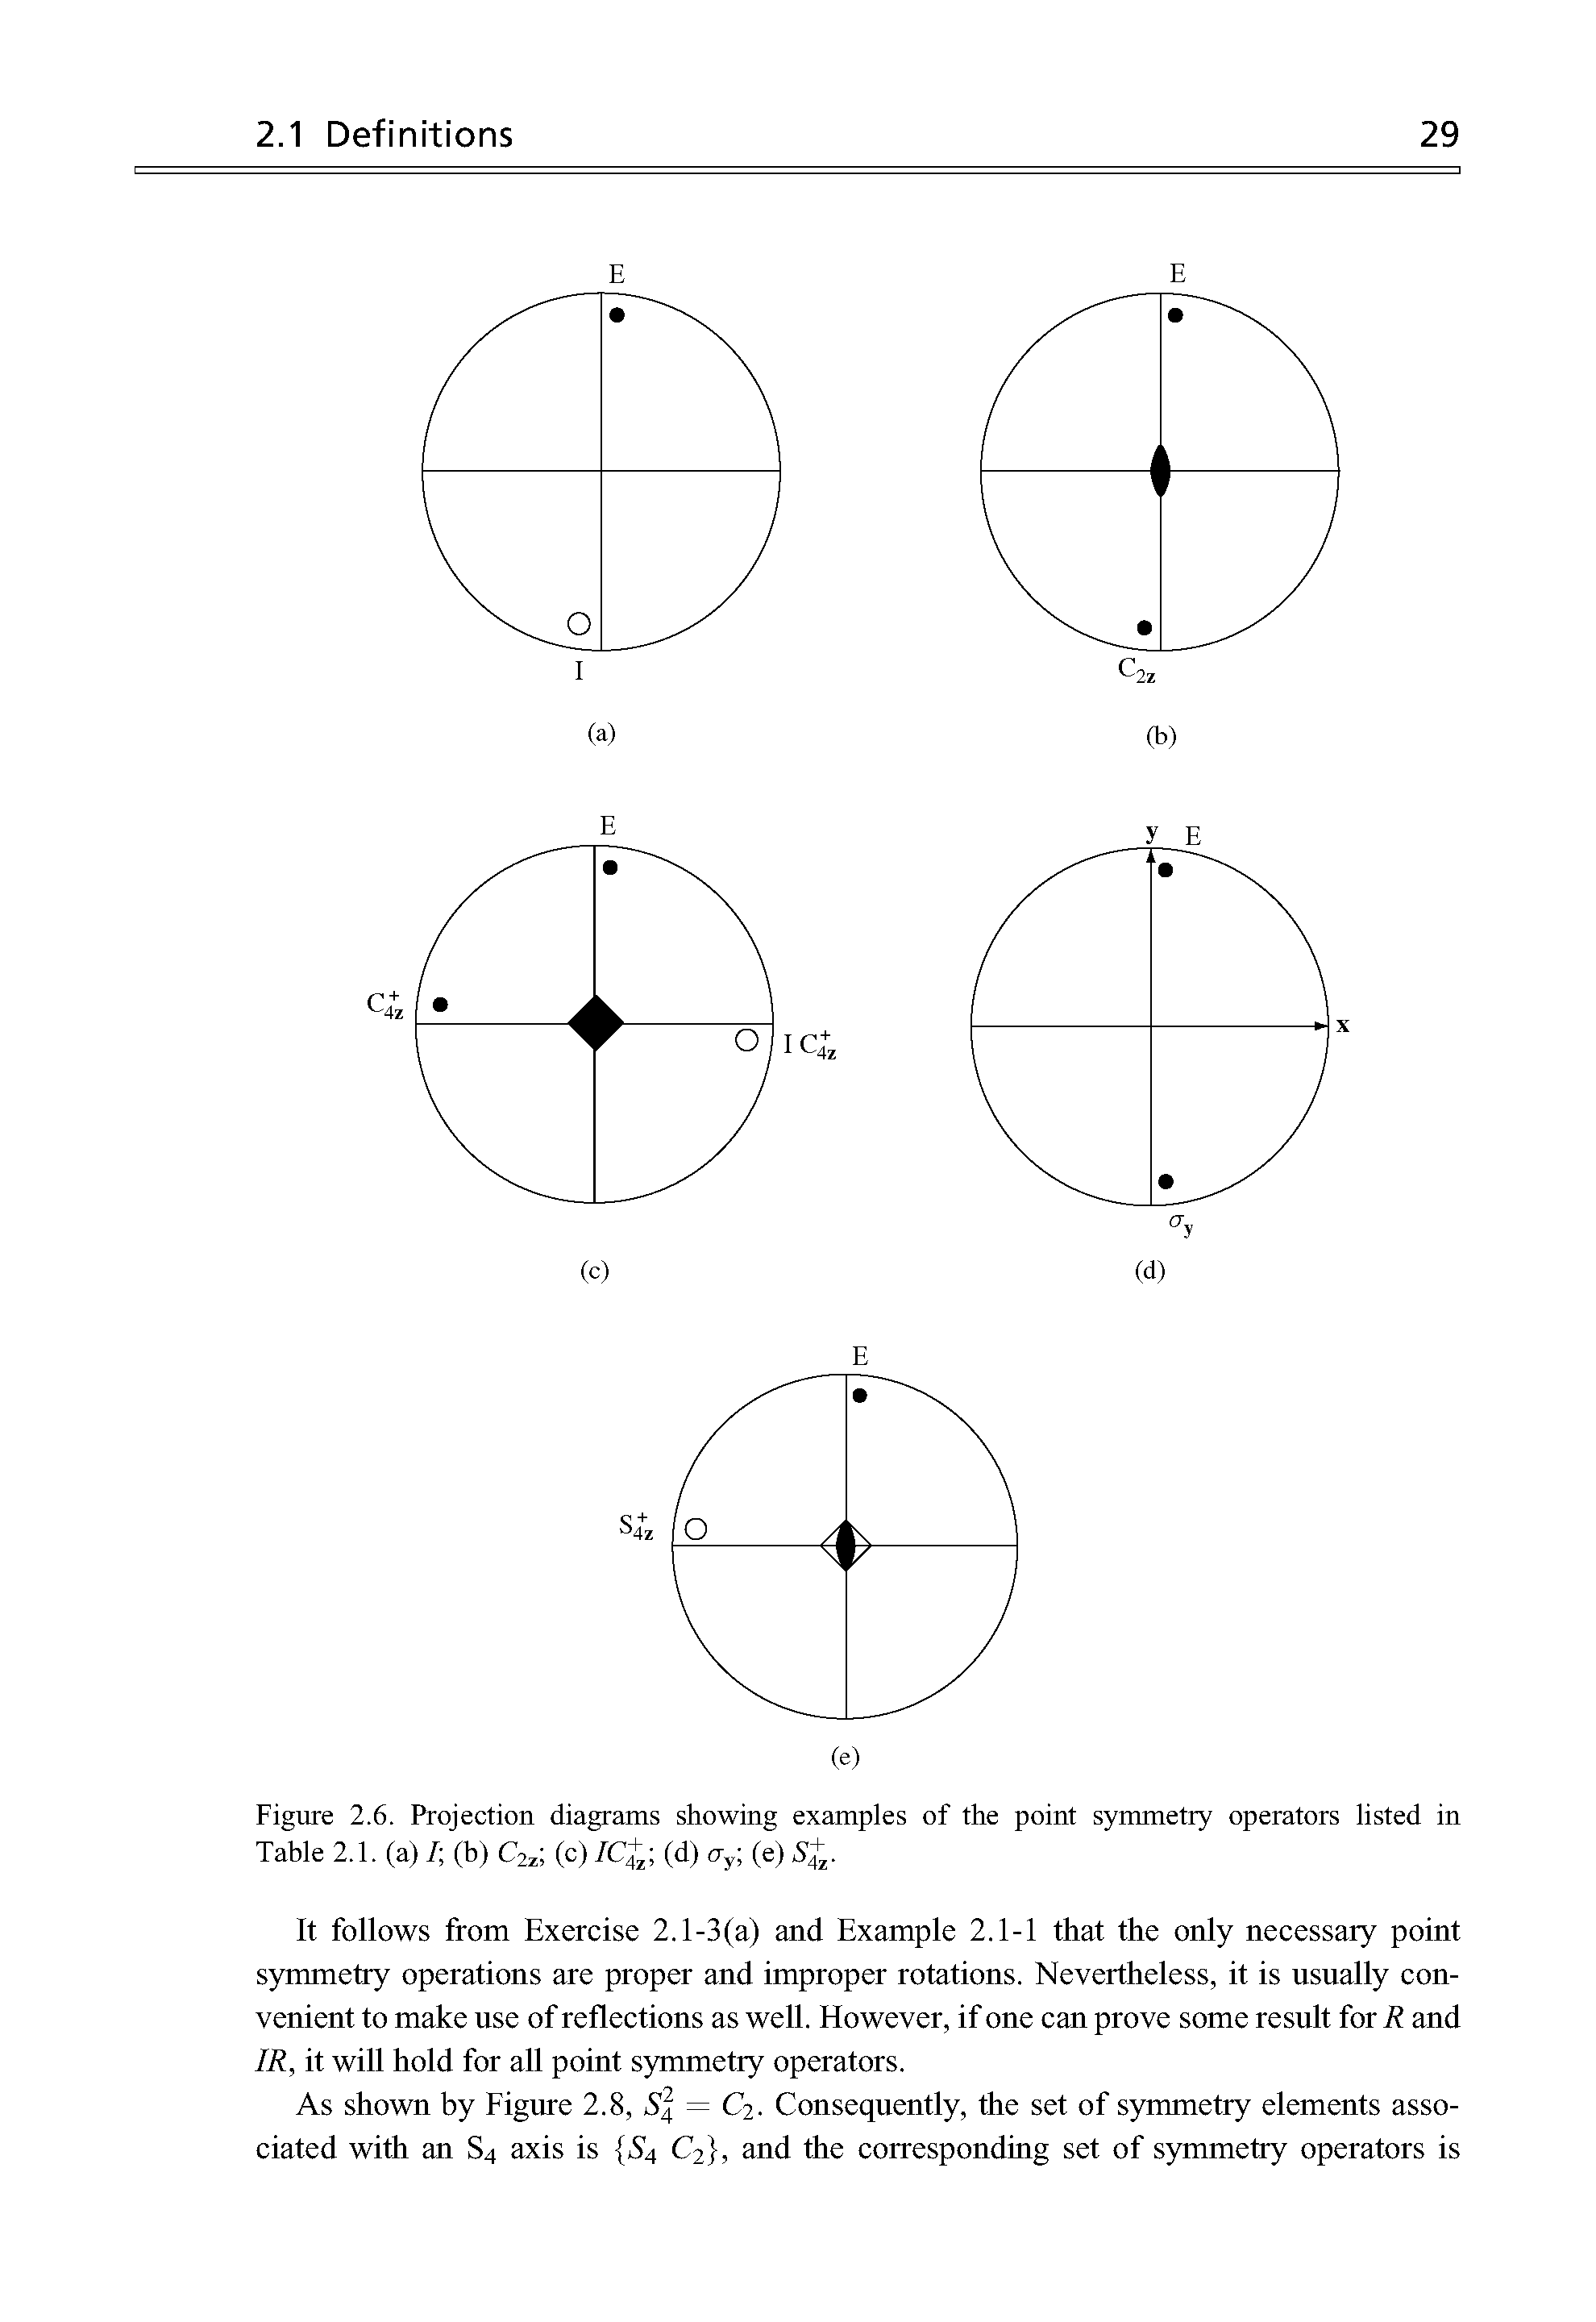 Figure 2.6. Projection diagrams showing examples of the point symmetry operators listed in Table 2.1. (a) / (b) C2z (c) /C4+ (d) ay (e) S+.